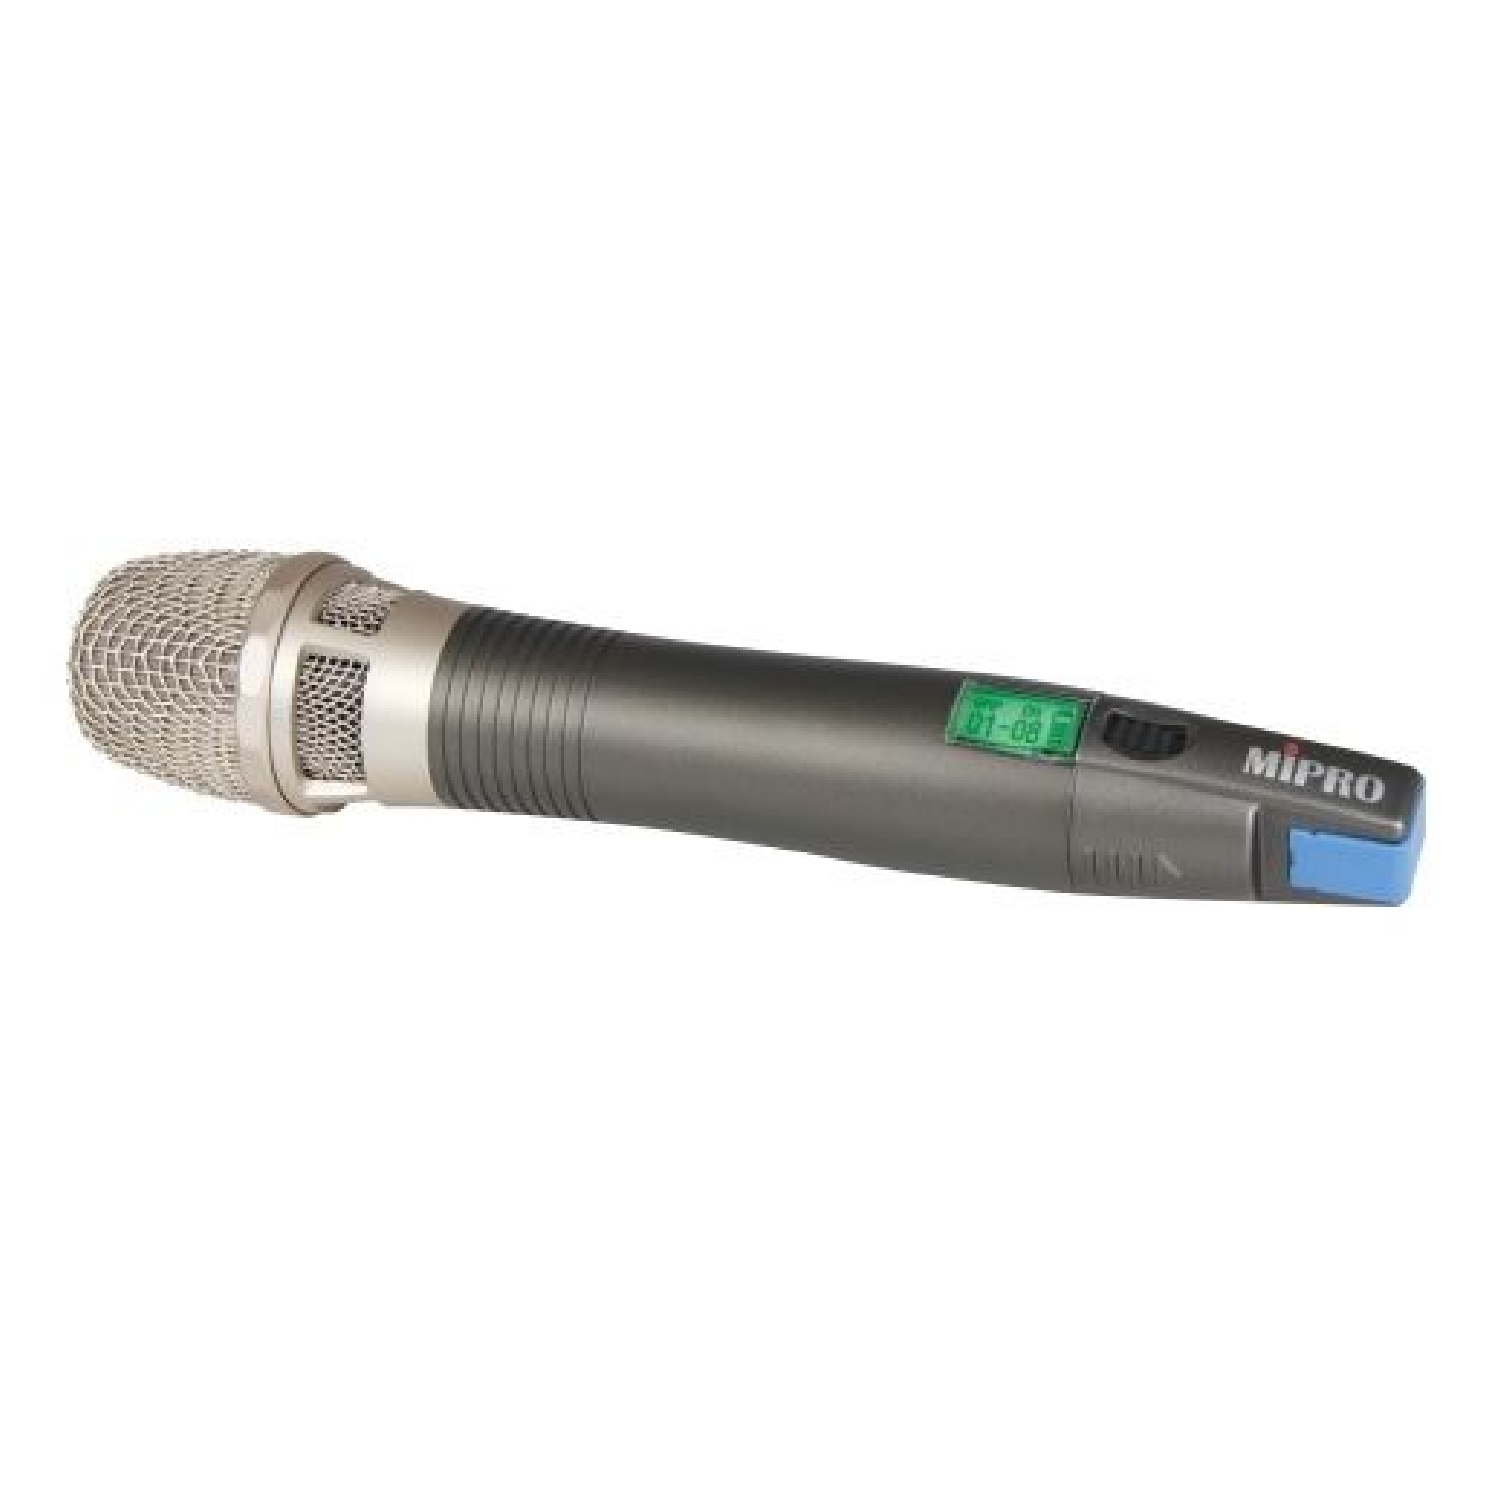 Rechargeable Condenser Handheld Microphone (18500 Lithium Battery Included)   ACT 72HC mipro